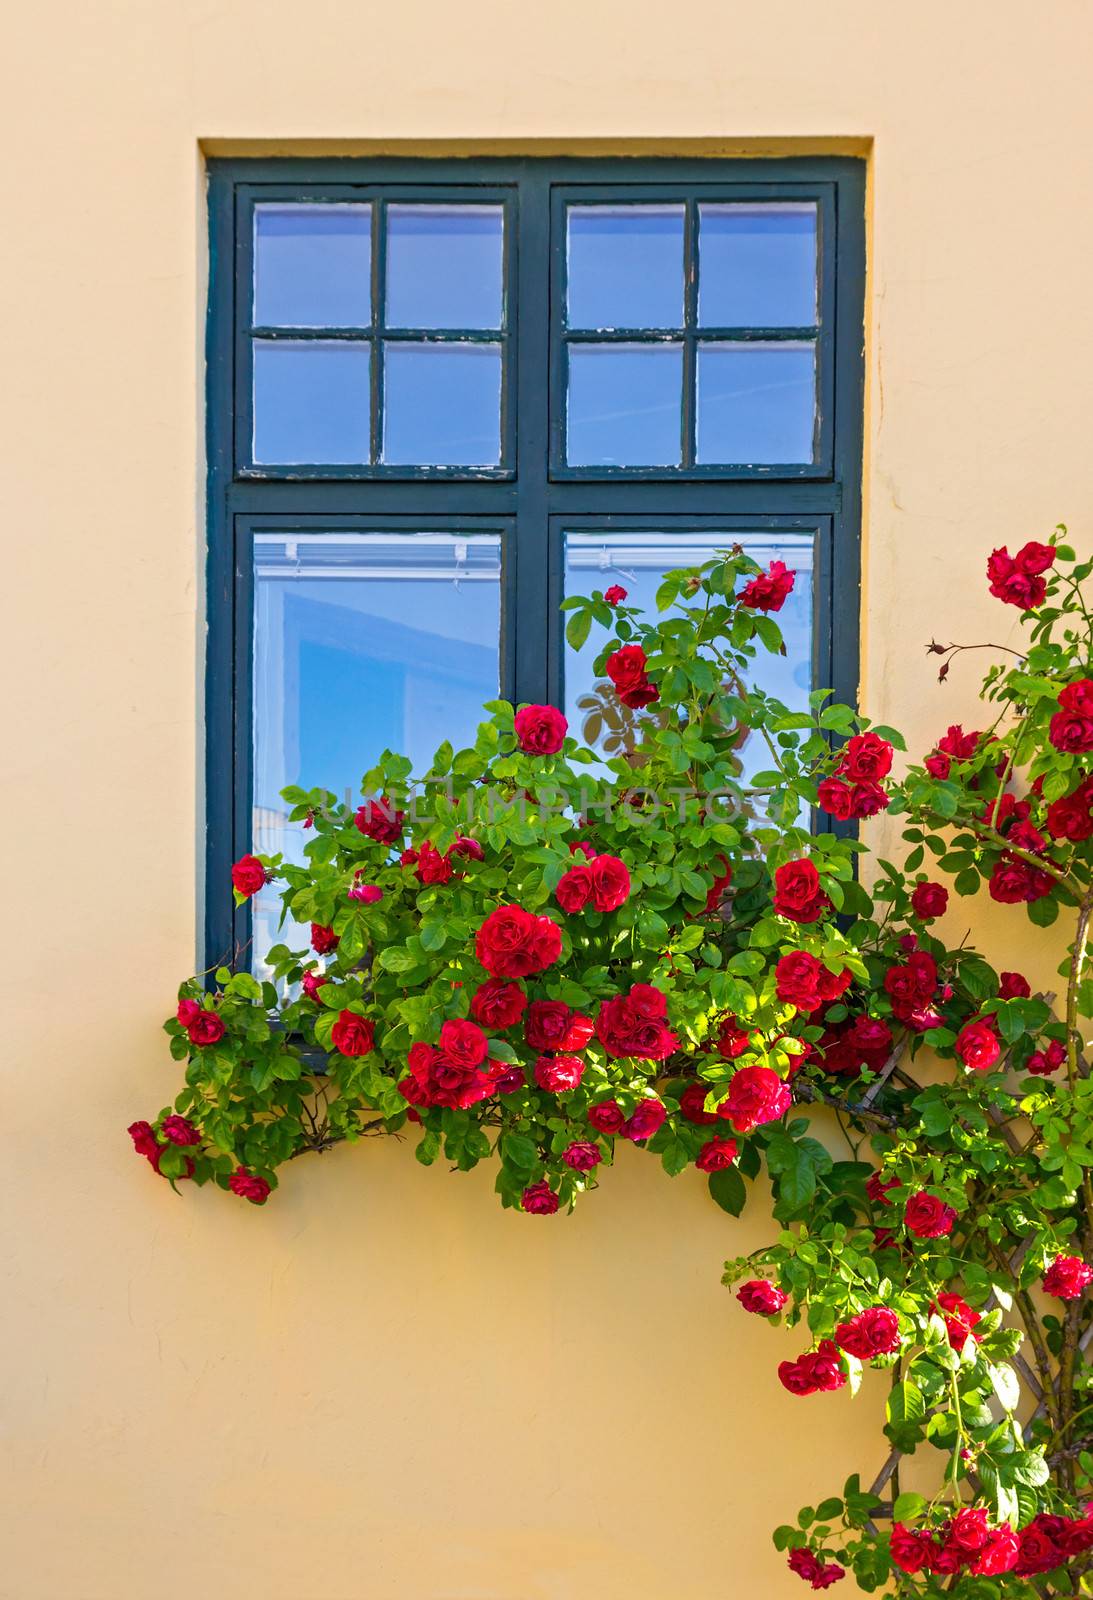 Roses decorating a house in Visby, capital of Gotland, Sweden.